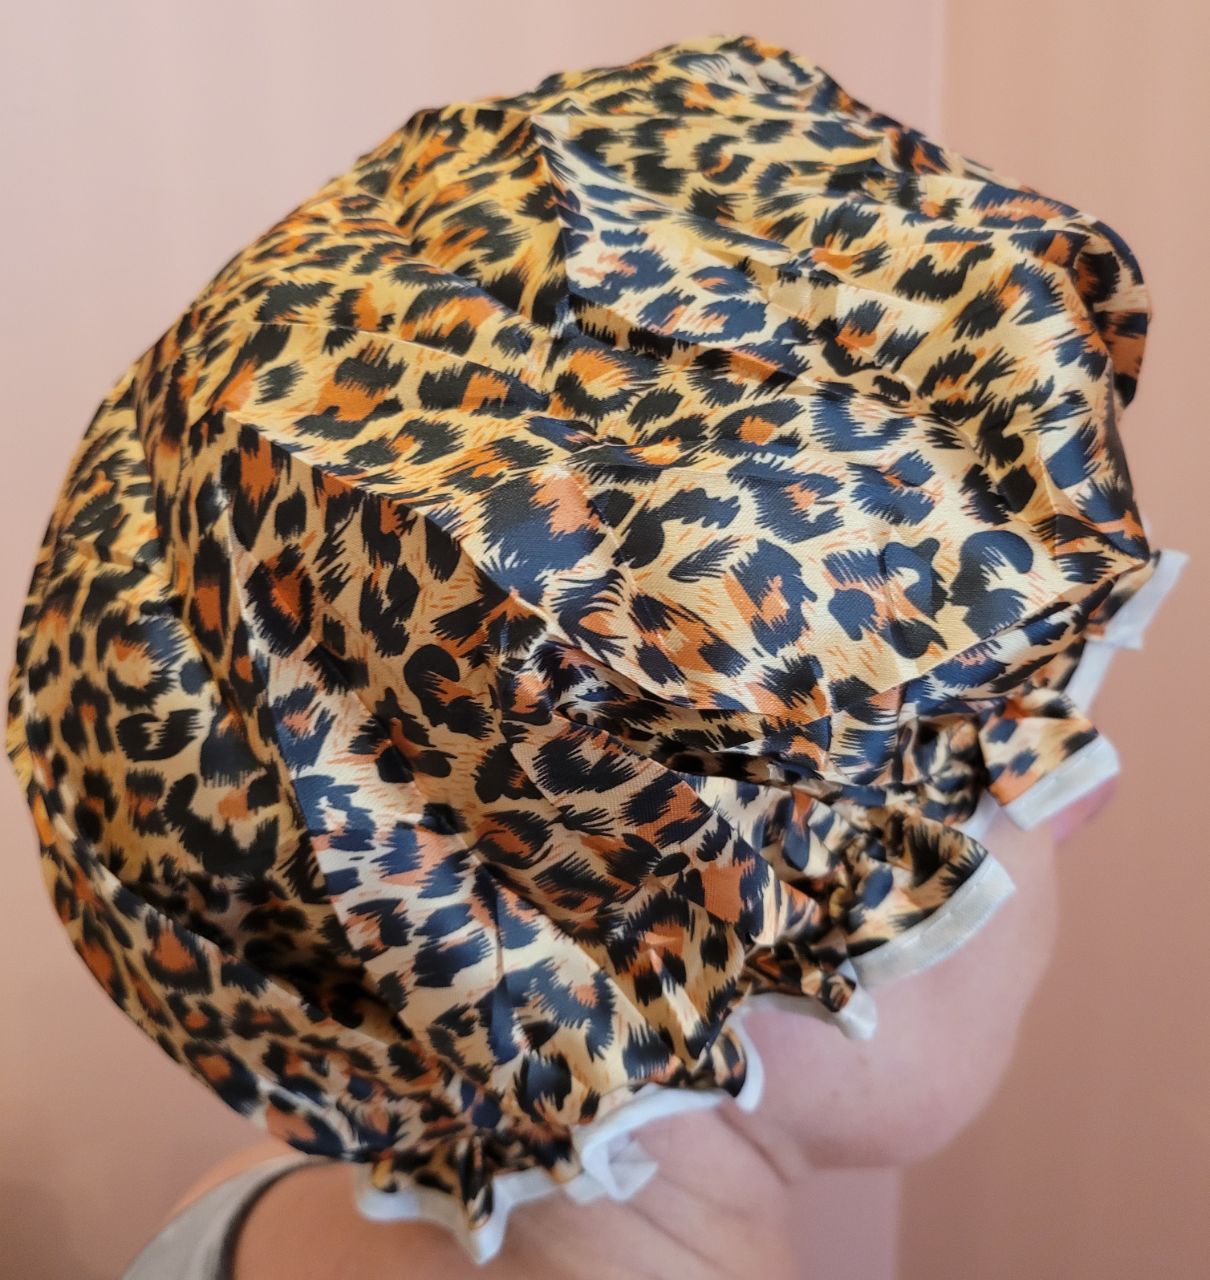 Extra large professional cap for herbal hair color &amp; plopping with the Curly Girl method | Model "Tiger Lilly"